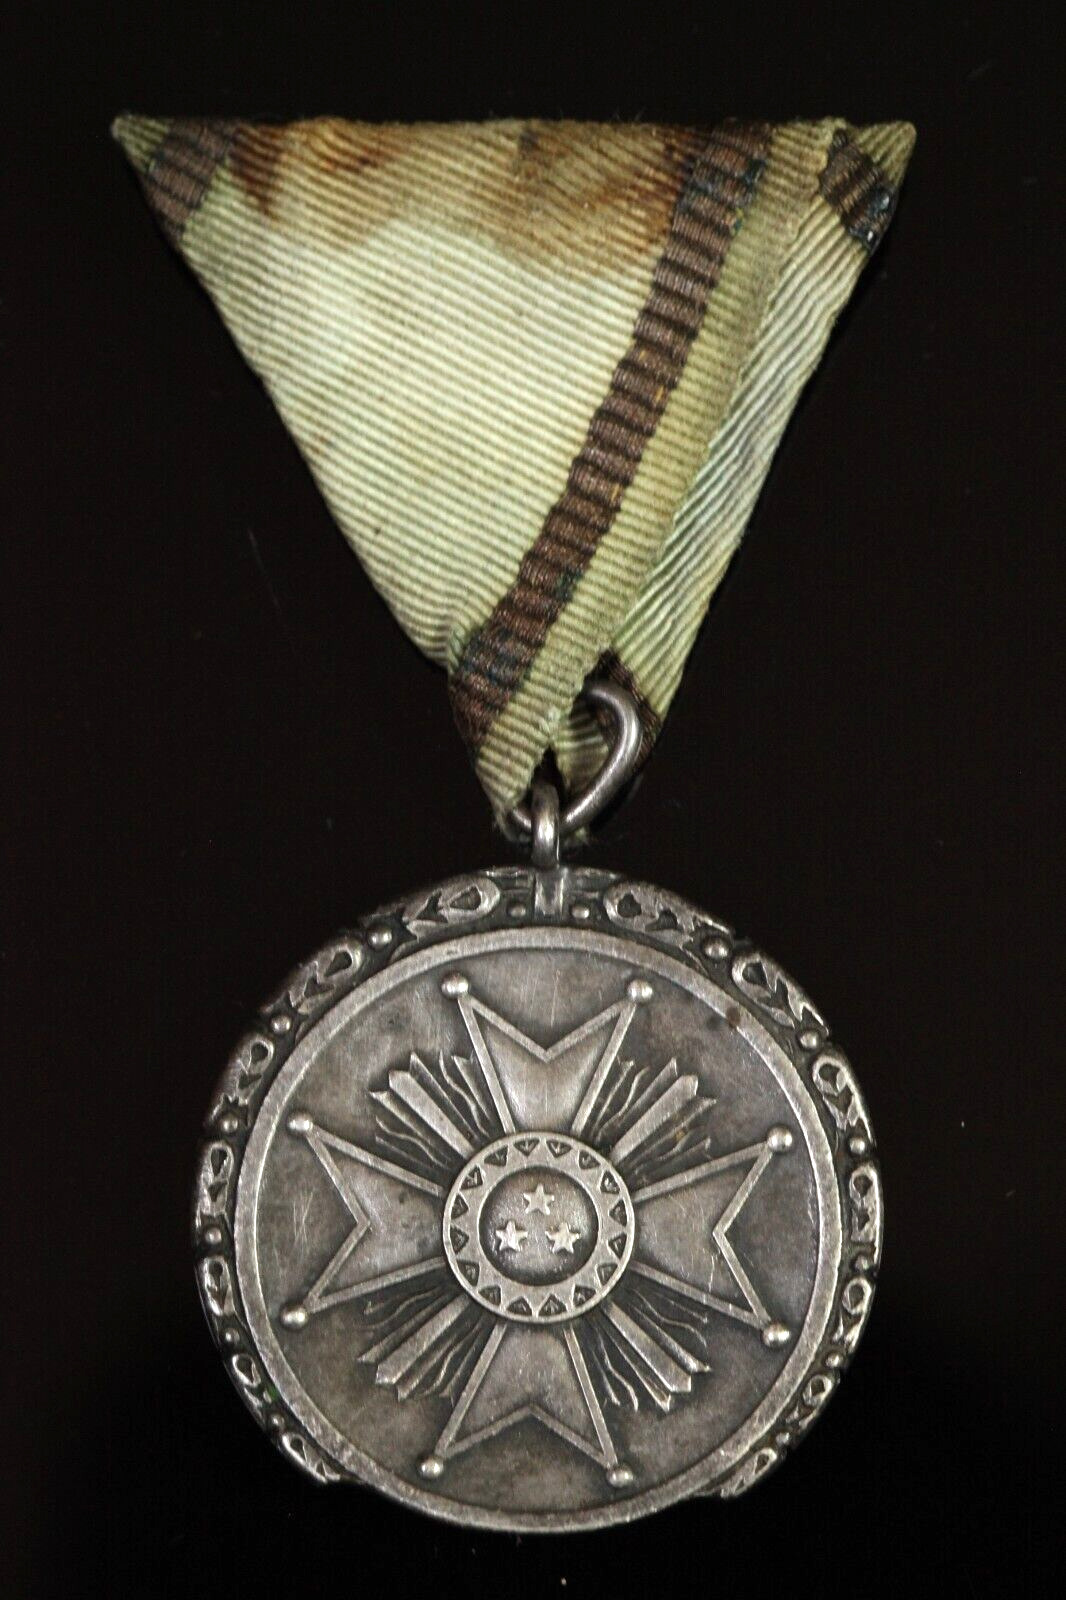 ORIG. 1930s Latvia SILVER Medal of Honour of the Order of the Three Stars 1451